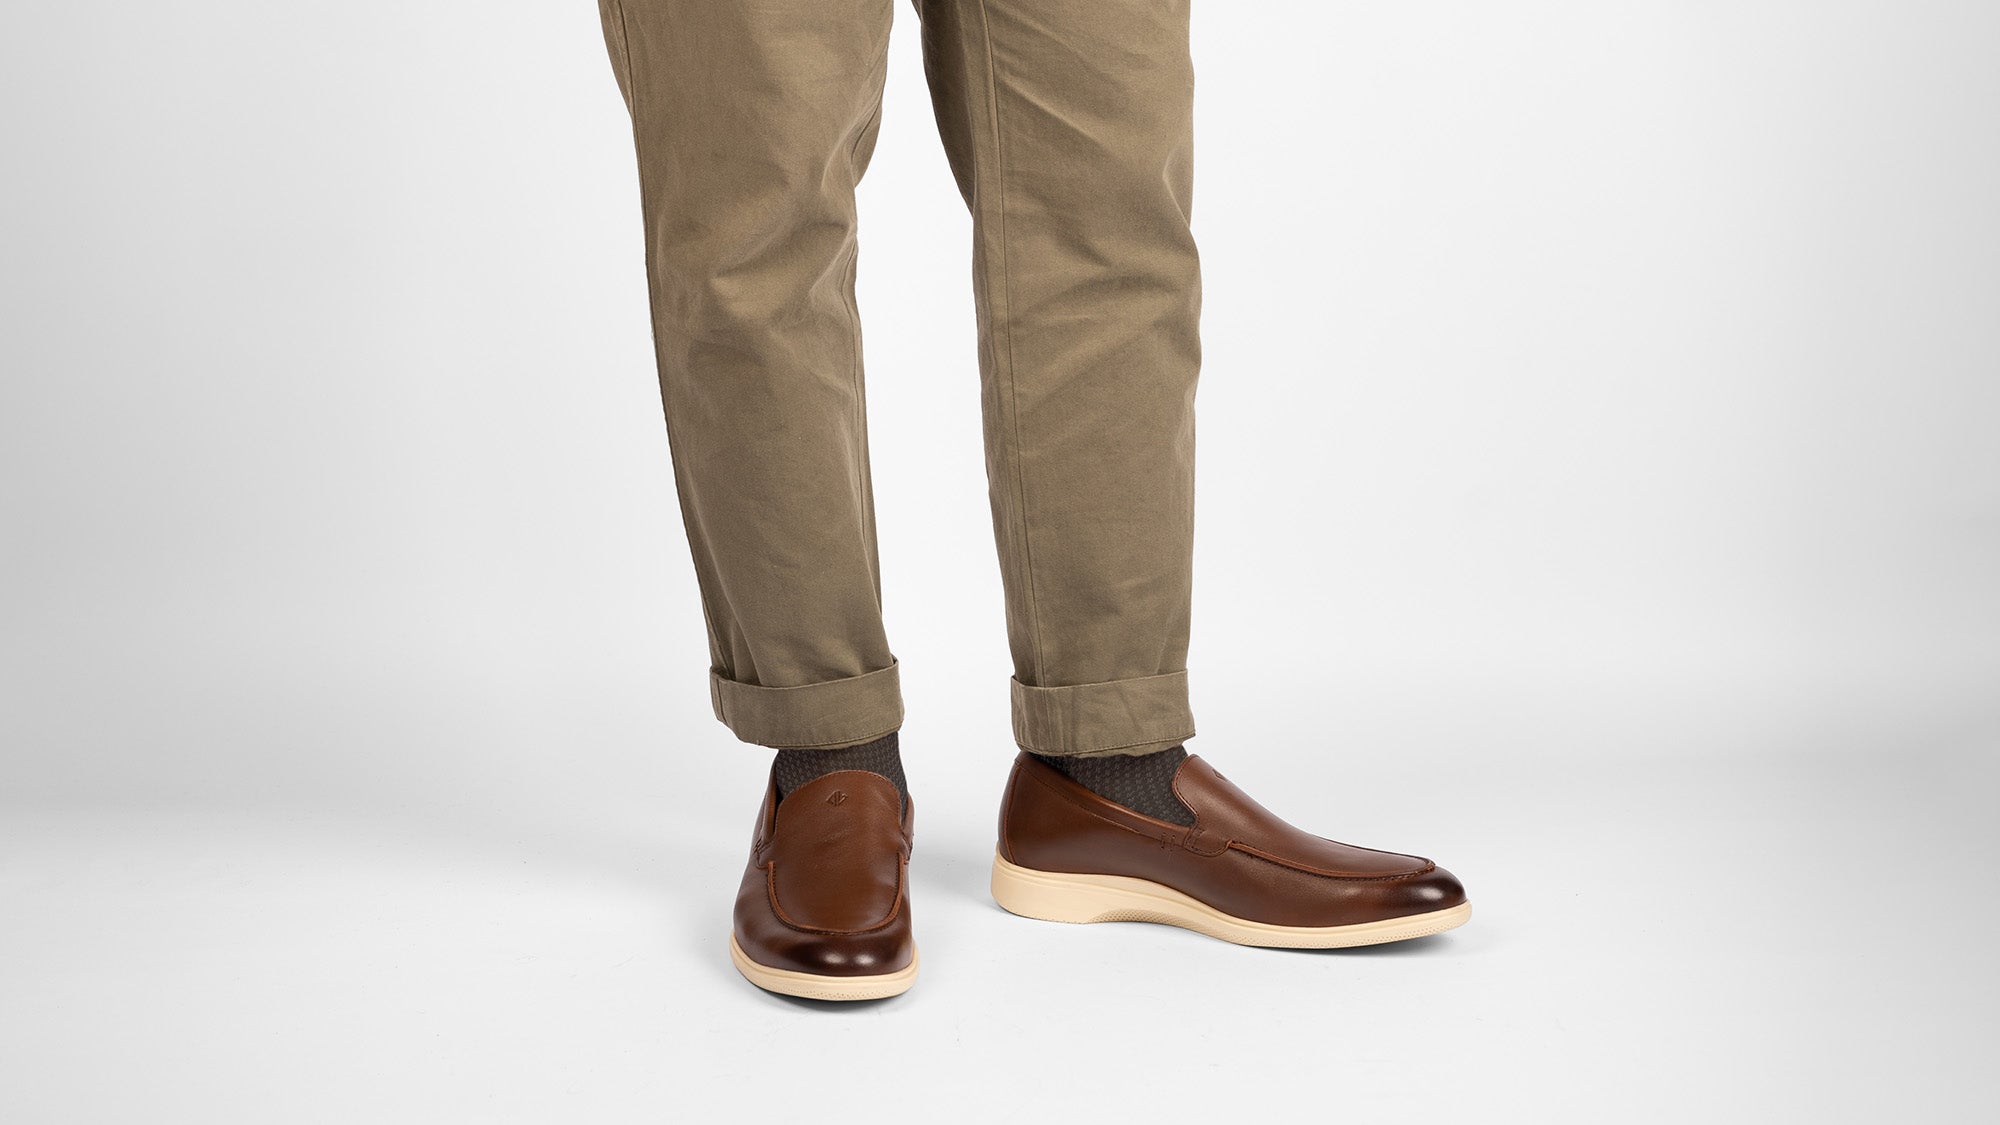 Chestnut loafers for surgeons